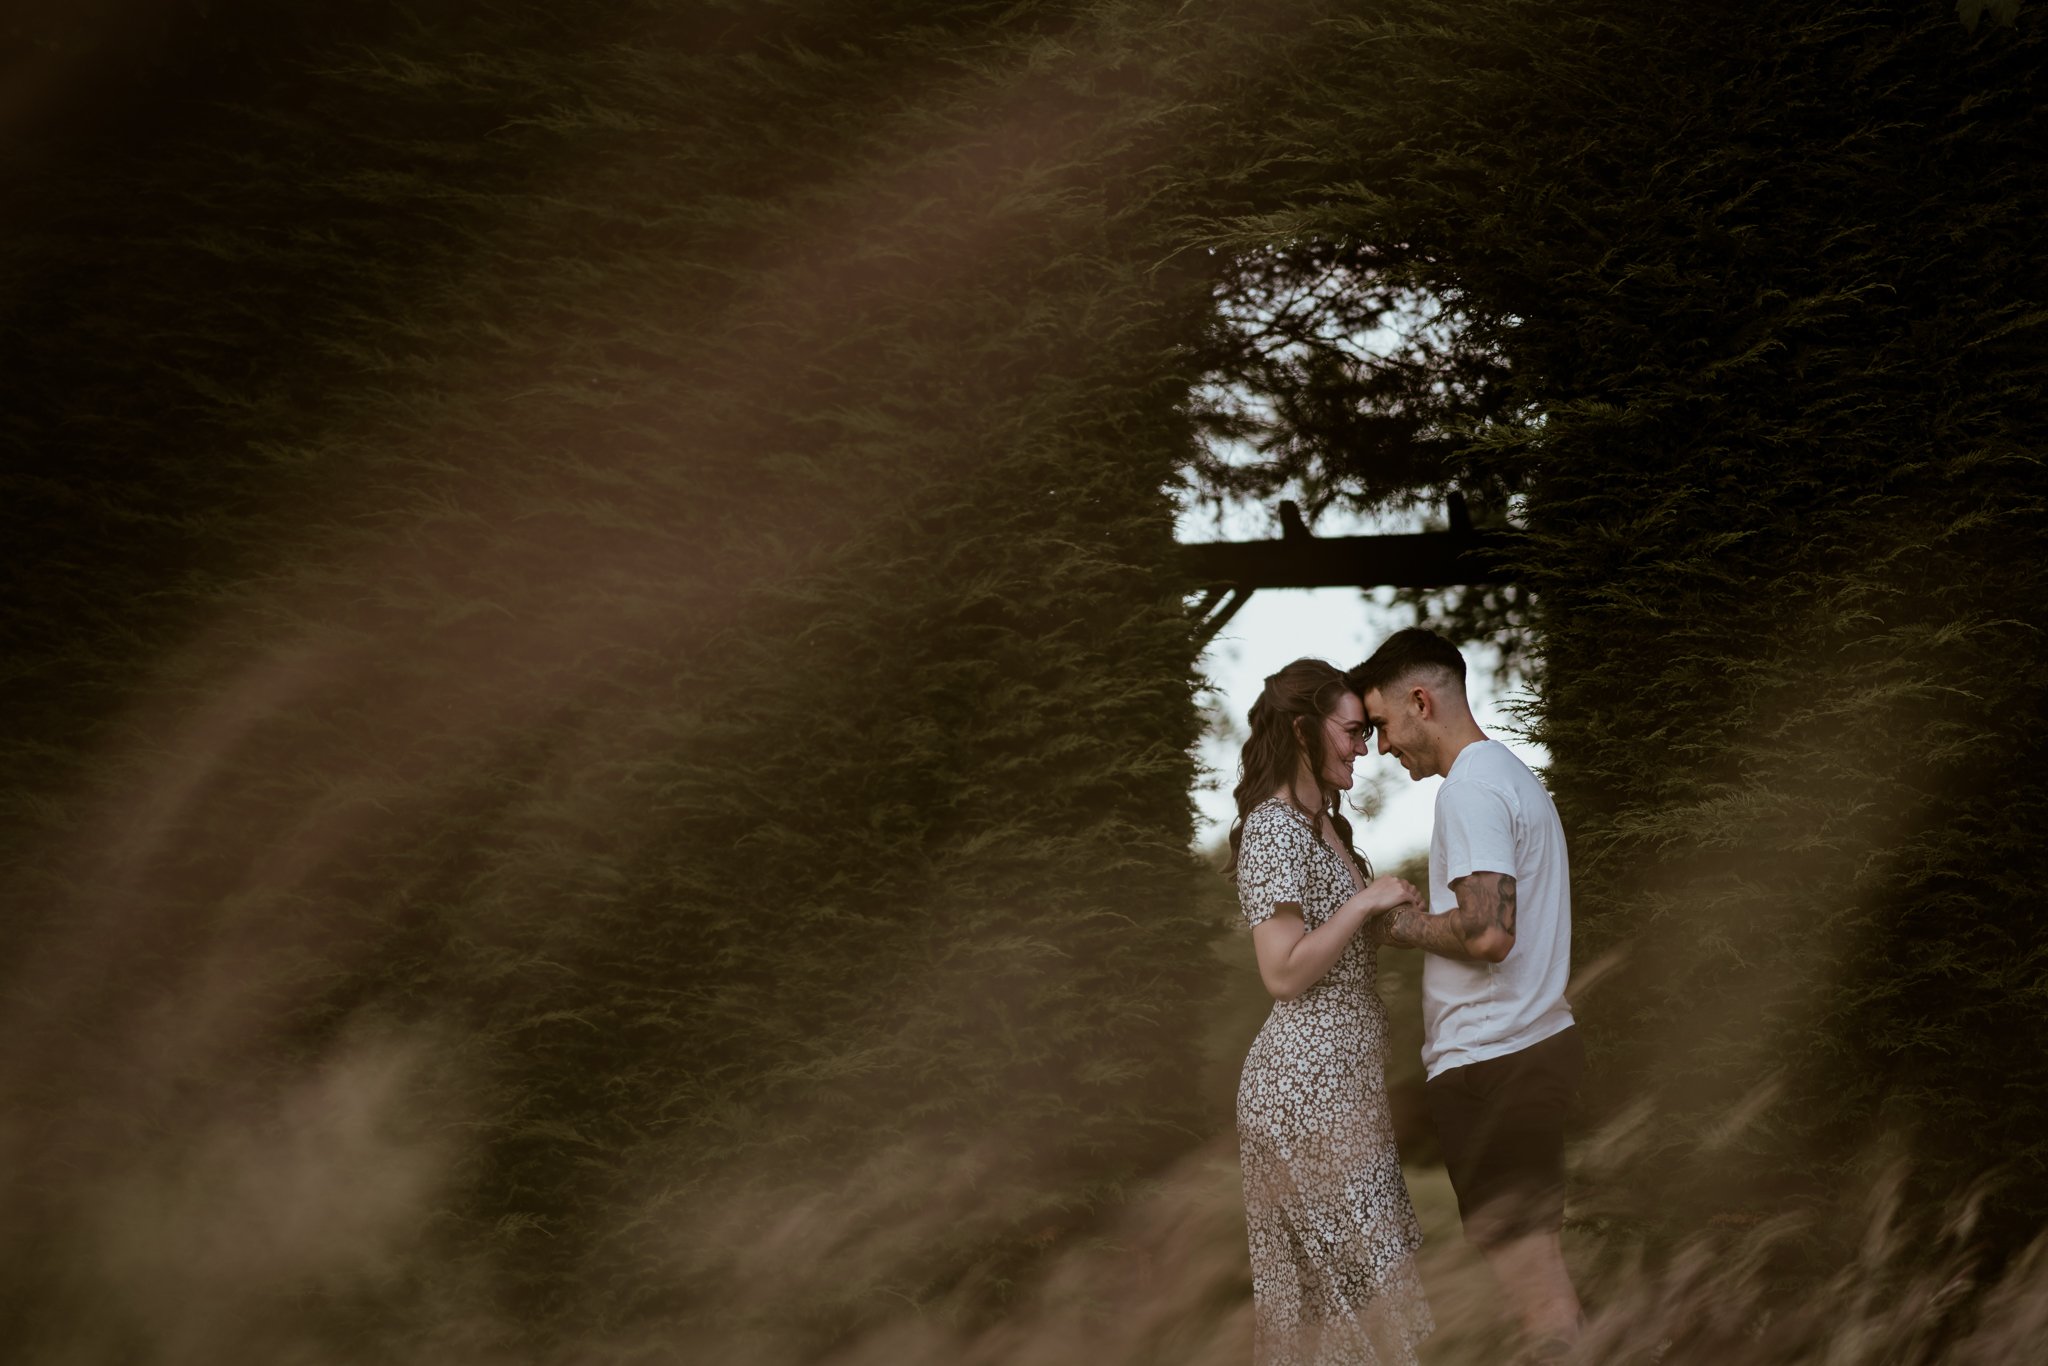 Angus Scotland Engagement and Wedding Photographer - Emily and Gabriel - Adventure Couple Session58.jpg